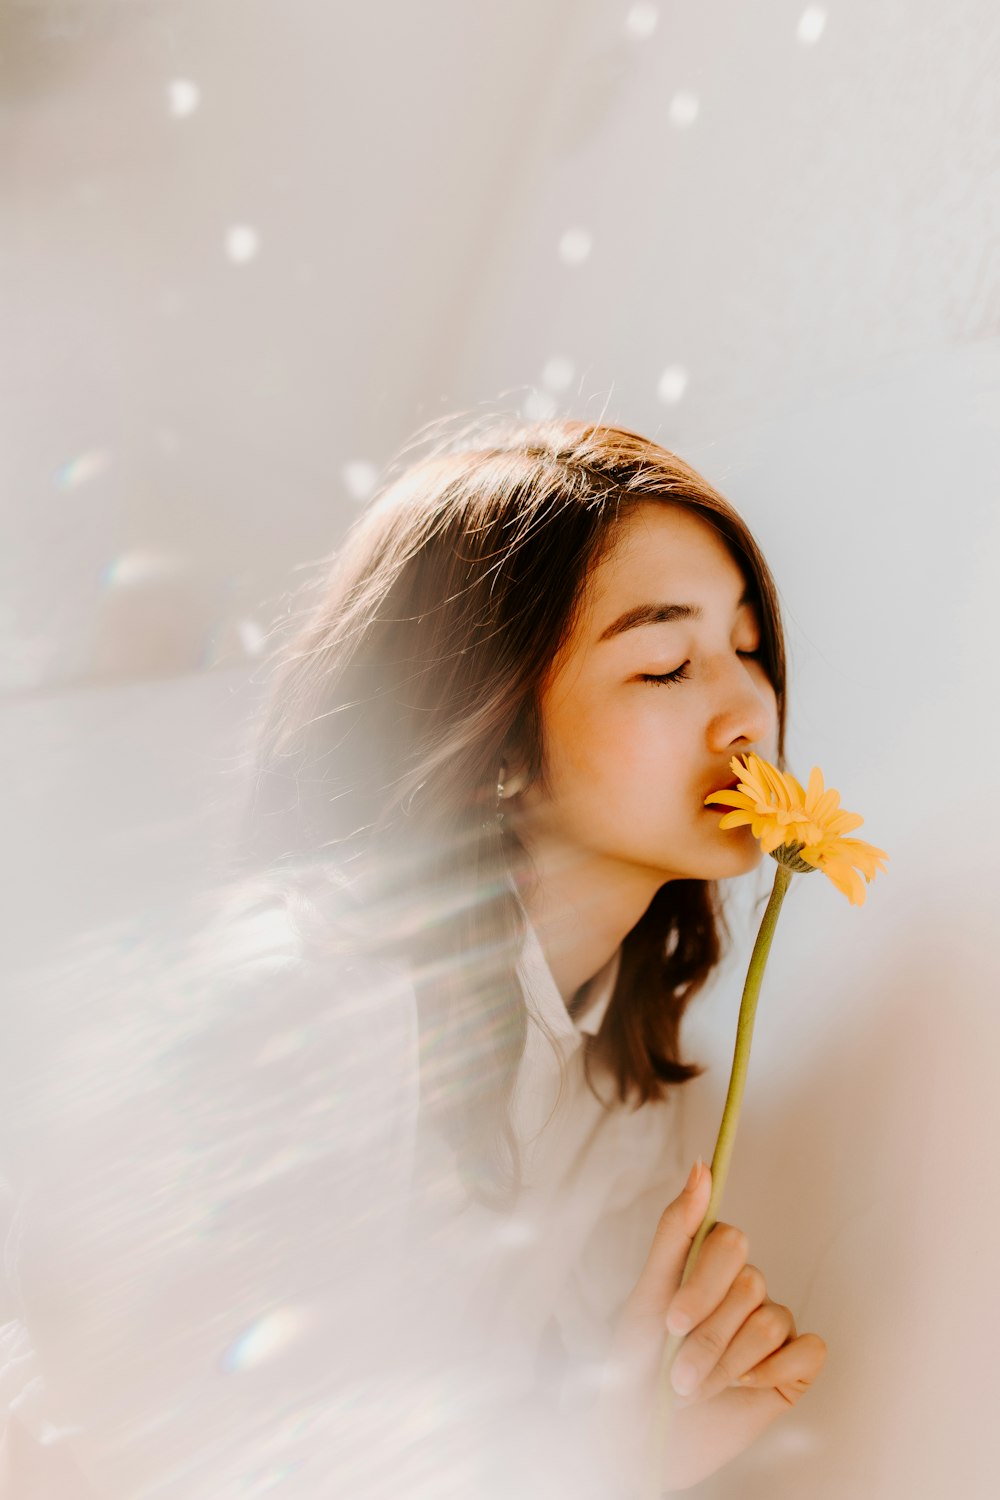 350+ Lovely Girl Pictures | Download Free Images on Unsplash